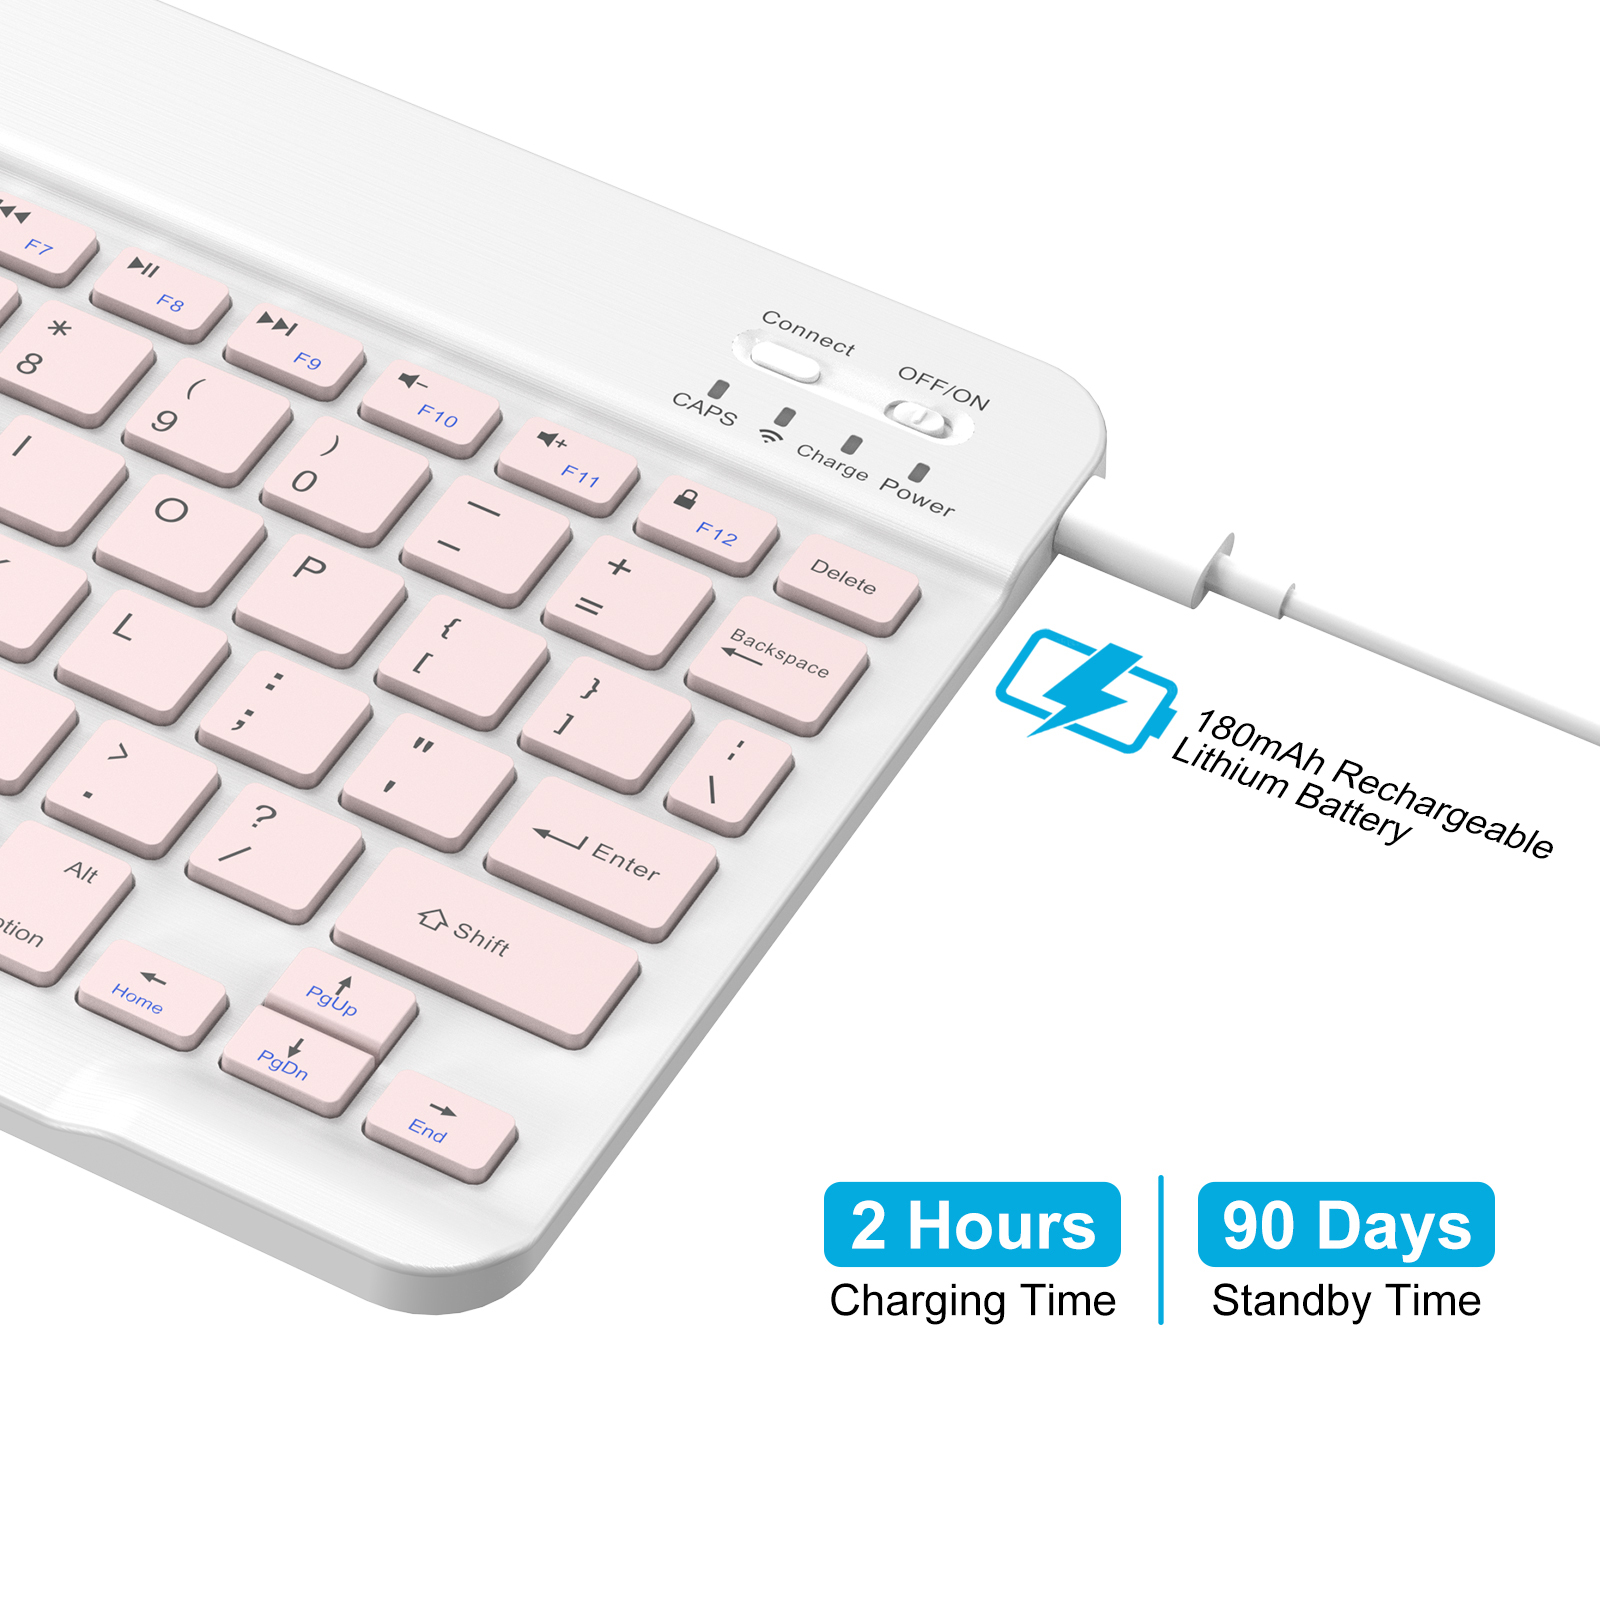 Cimetech Bluetooth Keyboard, Ultra-Slim Wireless Keyboard Quiet Portable Design with Built-in Rechargeable Battery for IOS, Mac, iPad, Windows and Android 3.0 and Above OS Pink - image 3 of 8